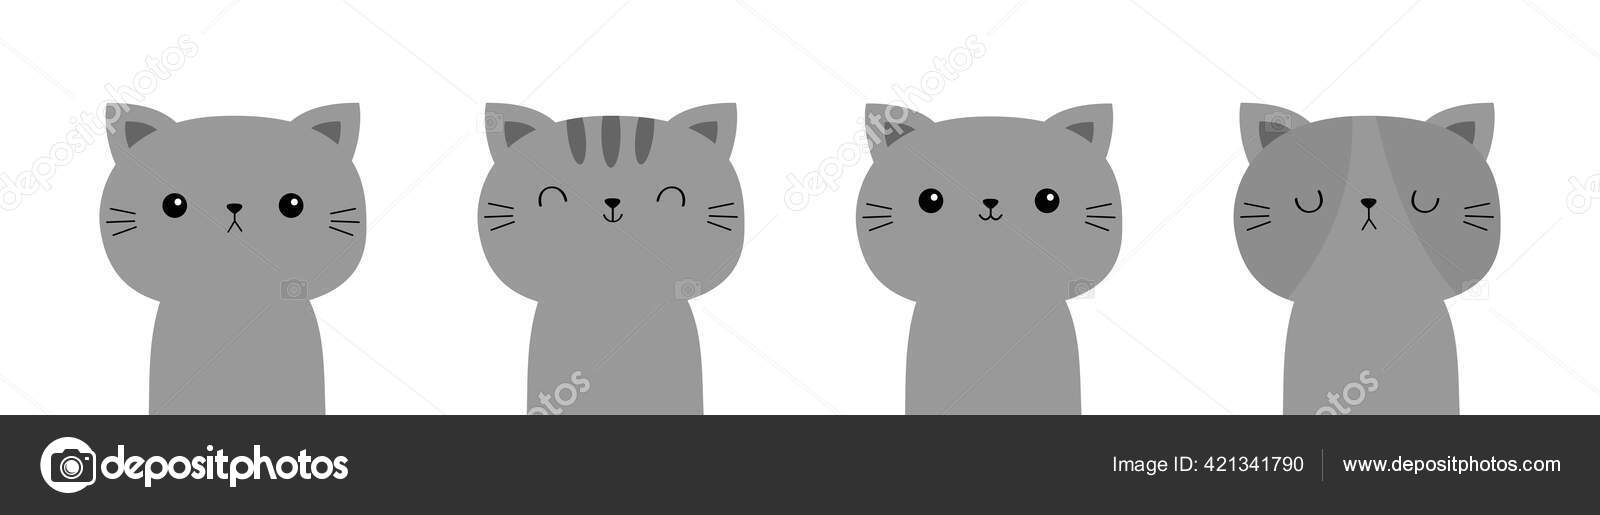 Doodle Love Cats Kitten Head Silhouette Stock Vector (Royalty Free